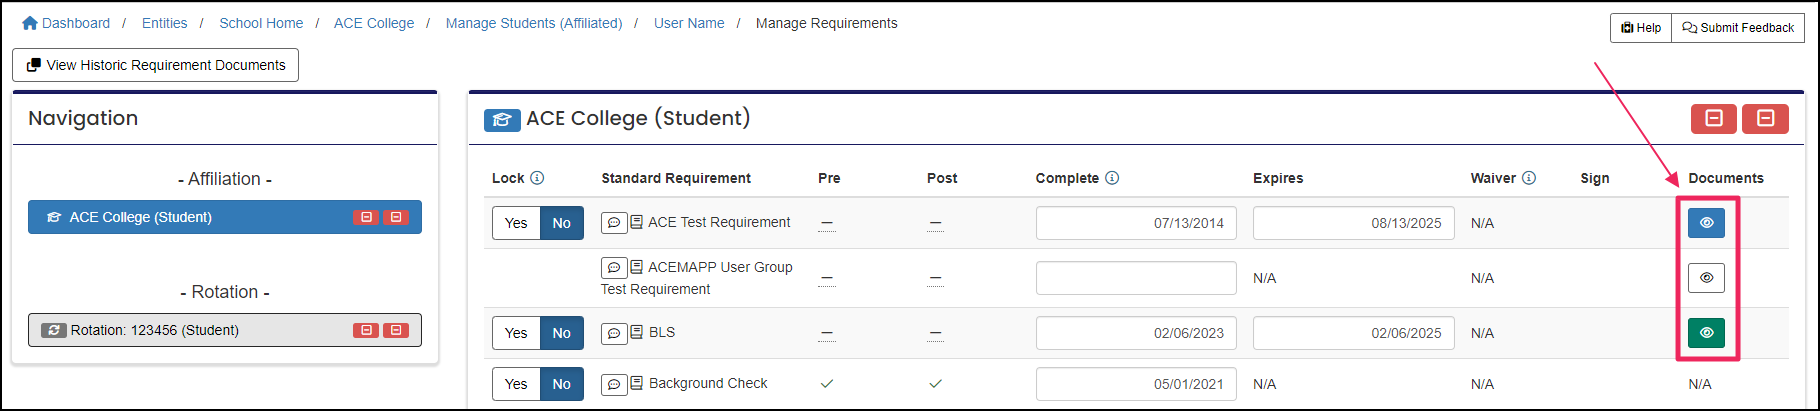 Image shows requirements page highlighting document view buttons.